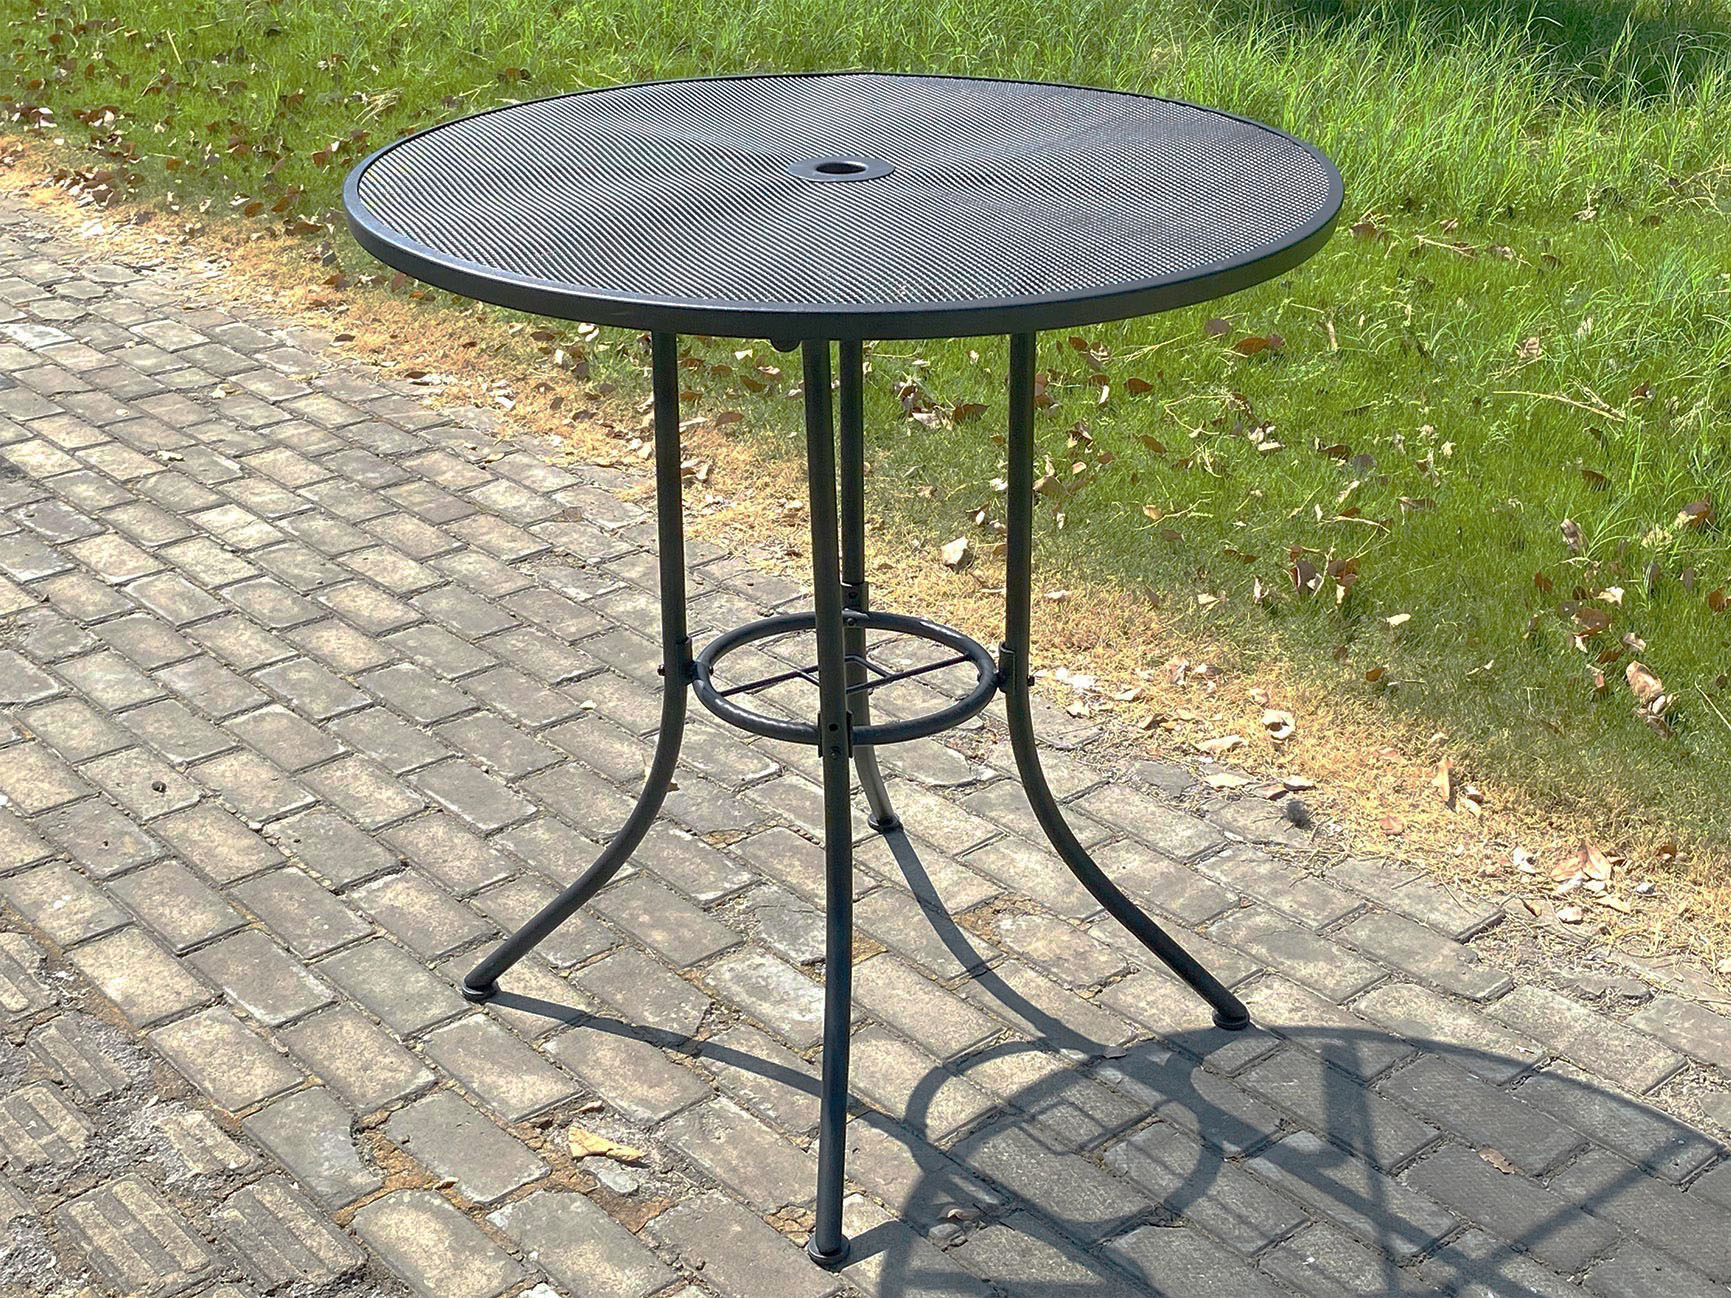 36” Round Table 36”H